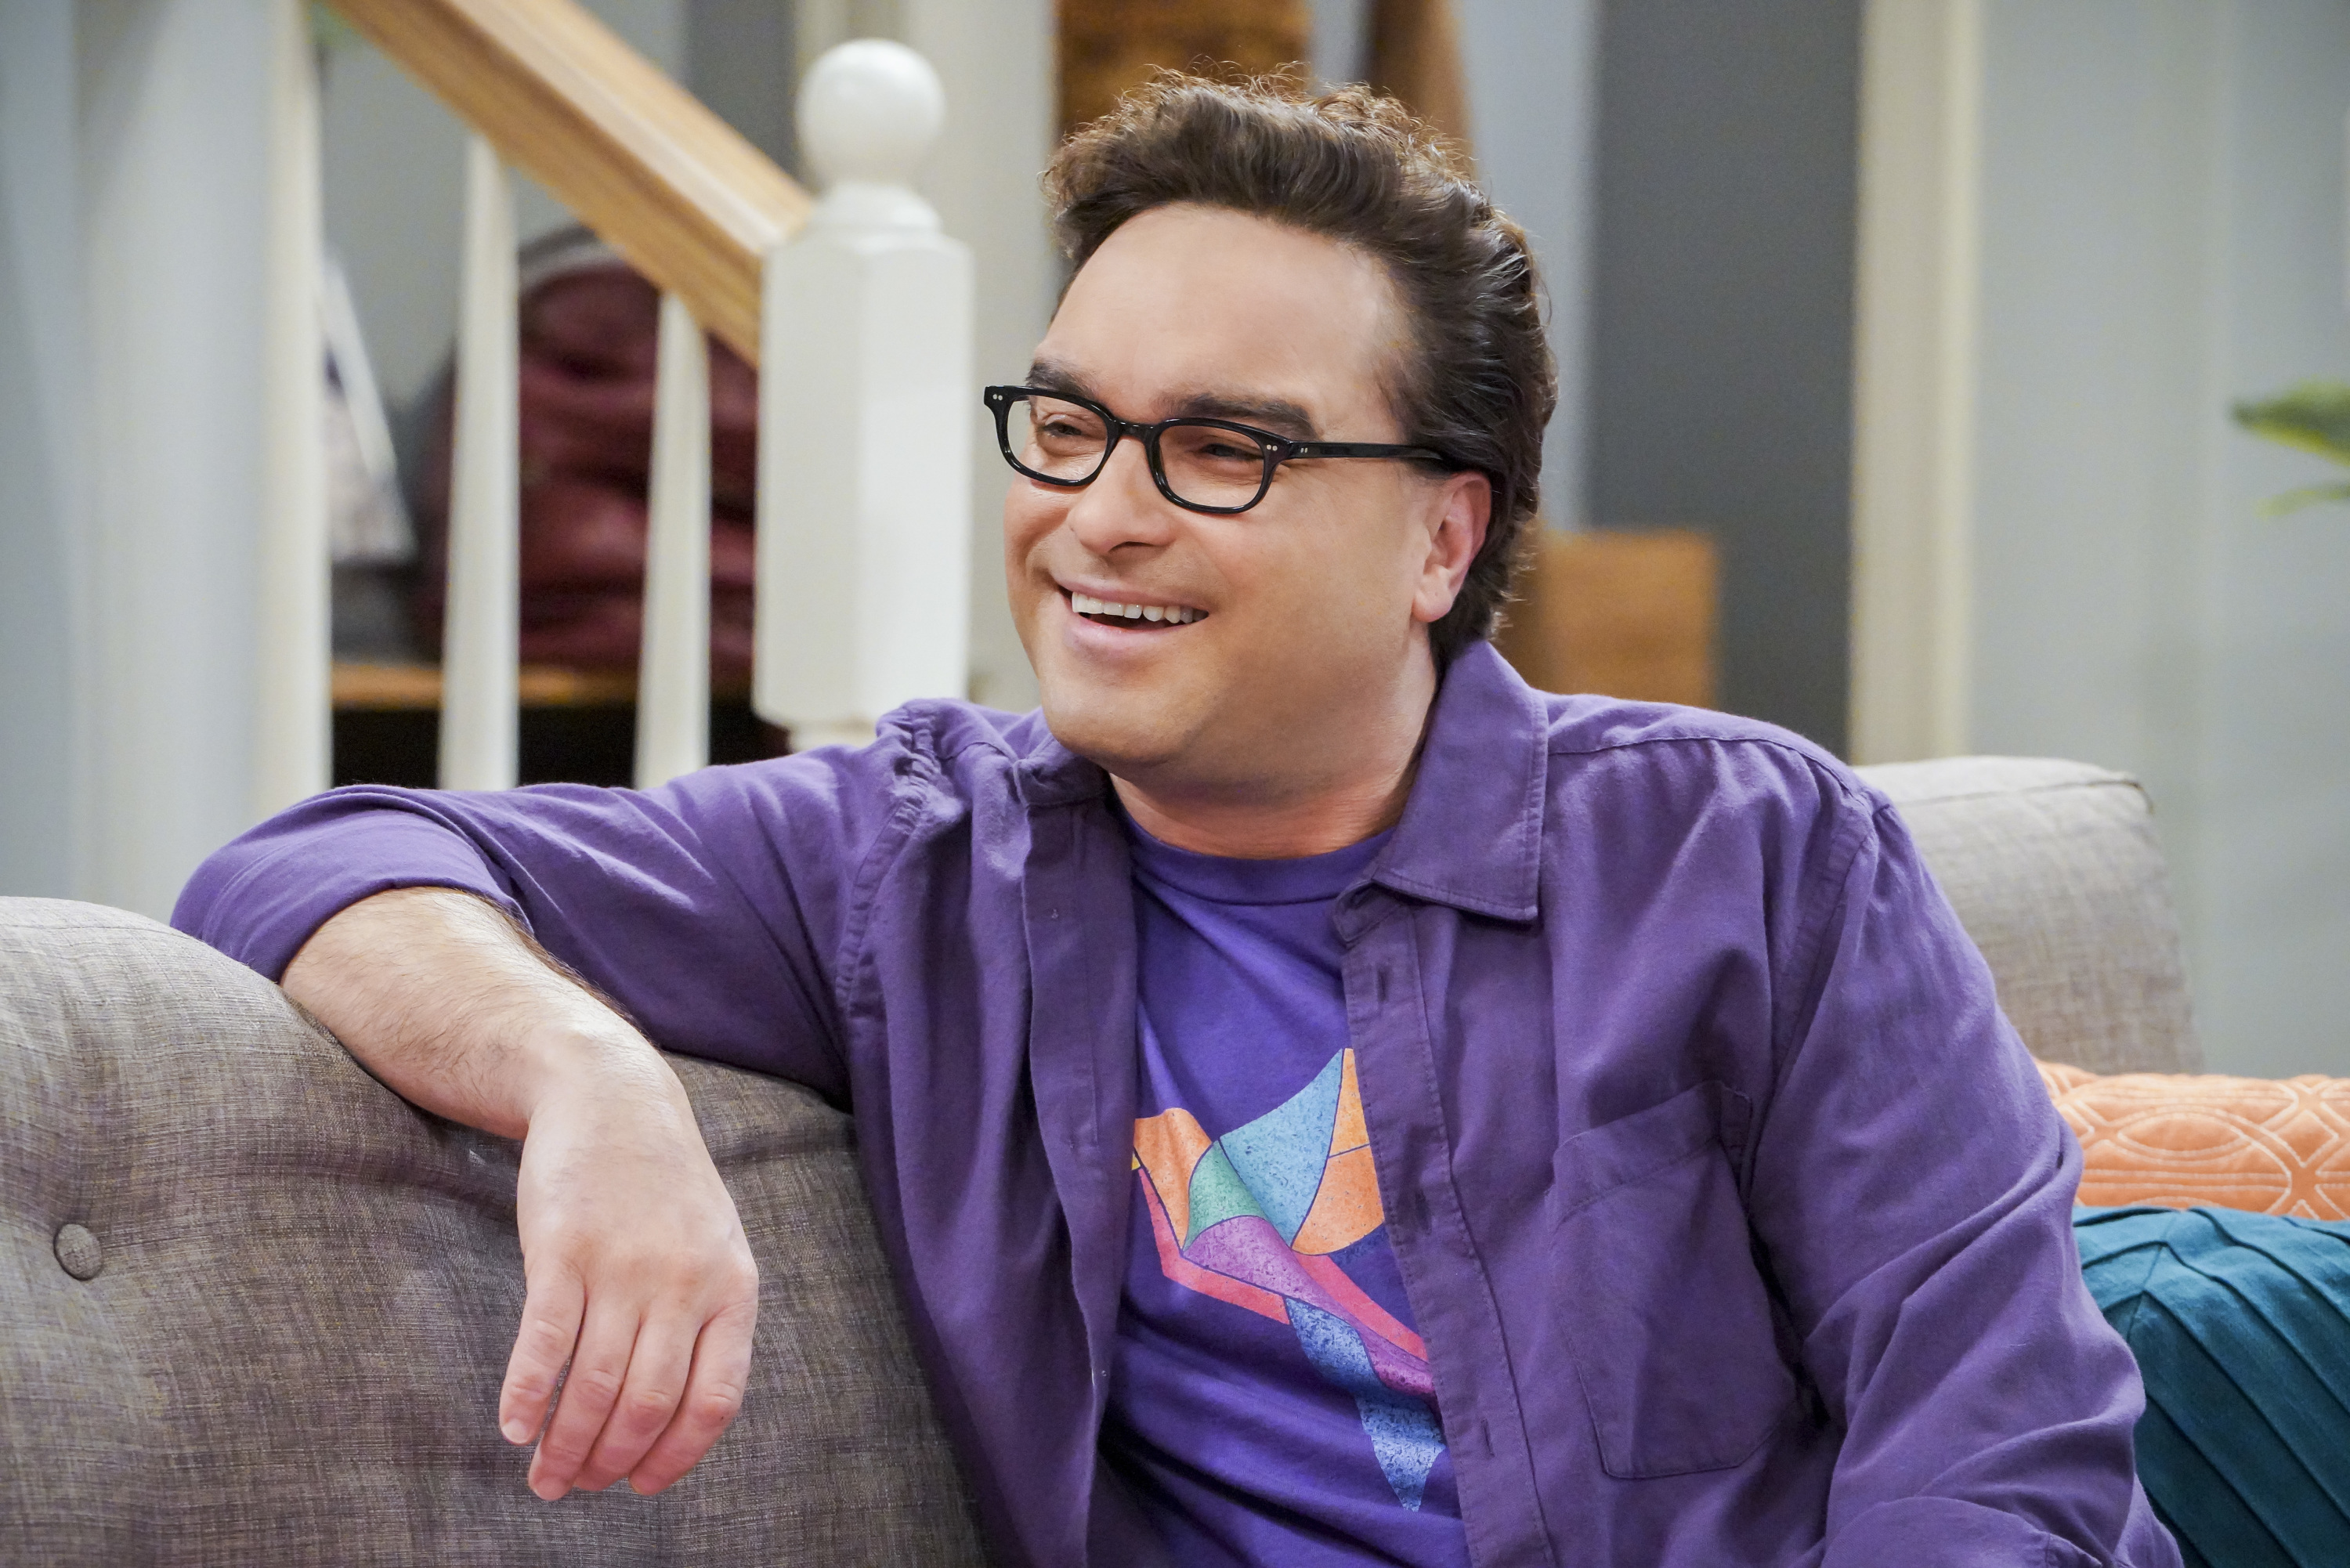 Leonard Hofstadter sits on the couch in an episode of 'The Big Bang Theory'